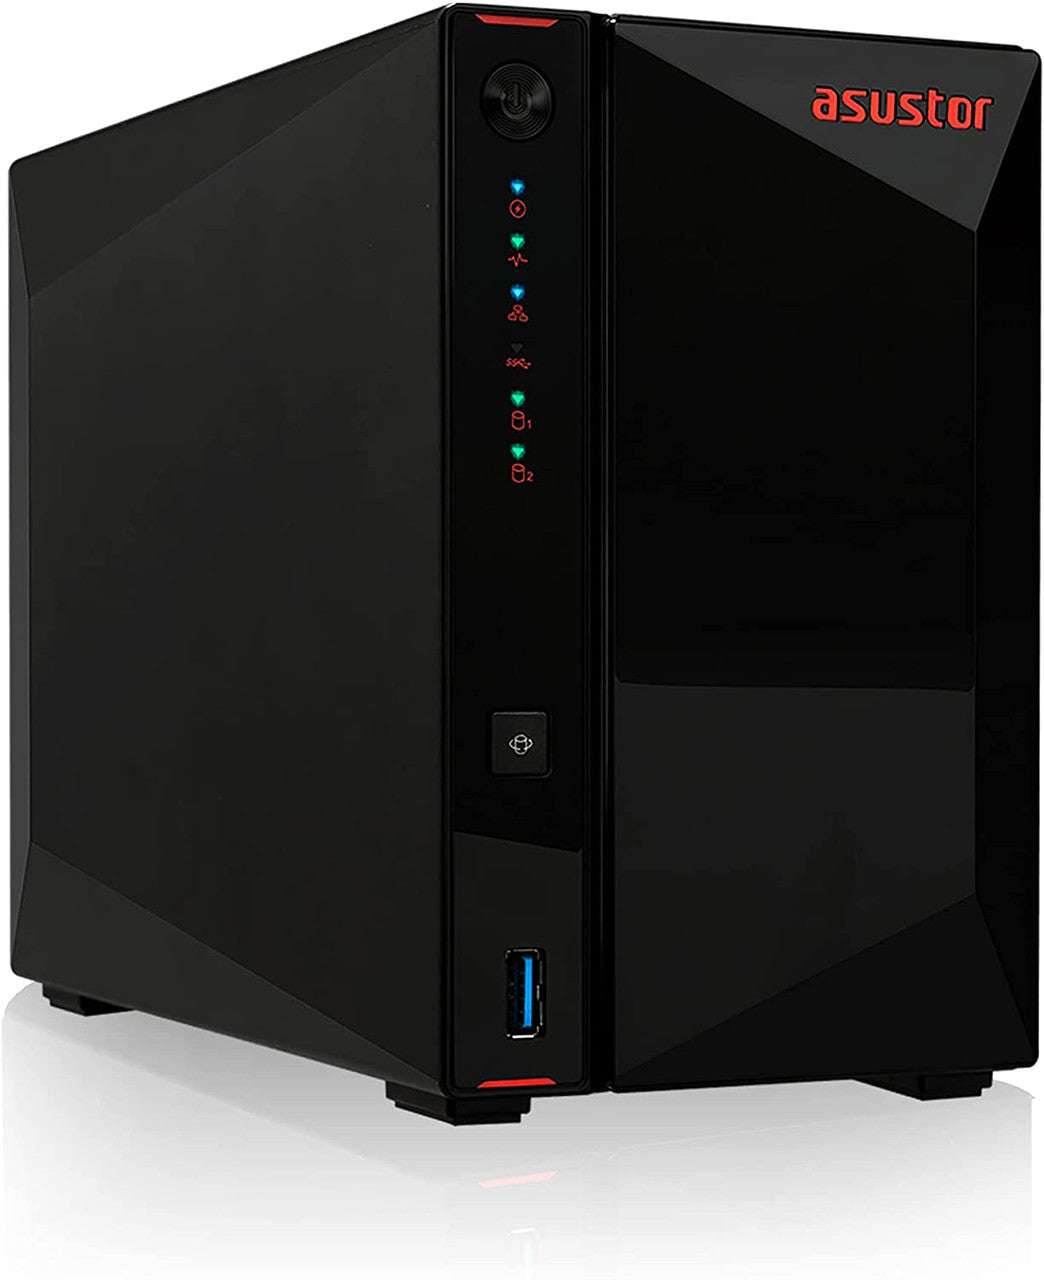 Asustor AS5202T 2-Bay Nimbustor 2 NAS with 2GB RAM and 8TB (2 x 4TB) Seagate Ironwolf NAS Drives Fully Assembled and Tested